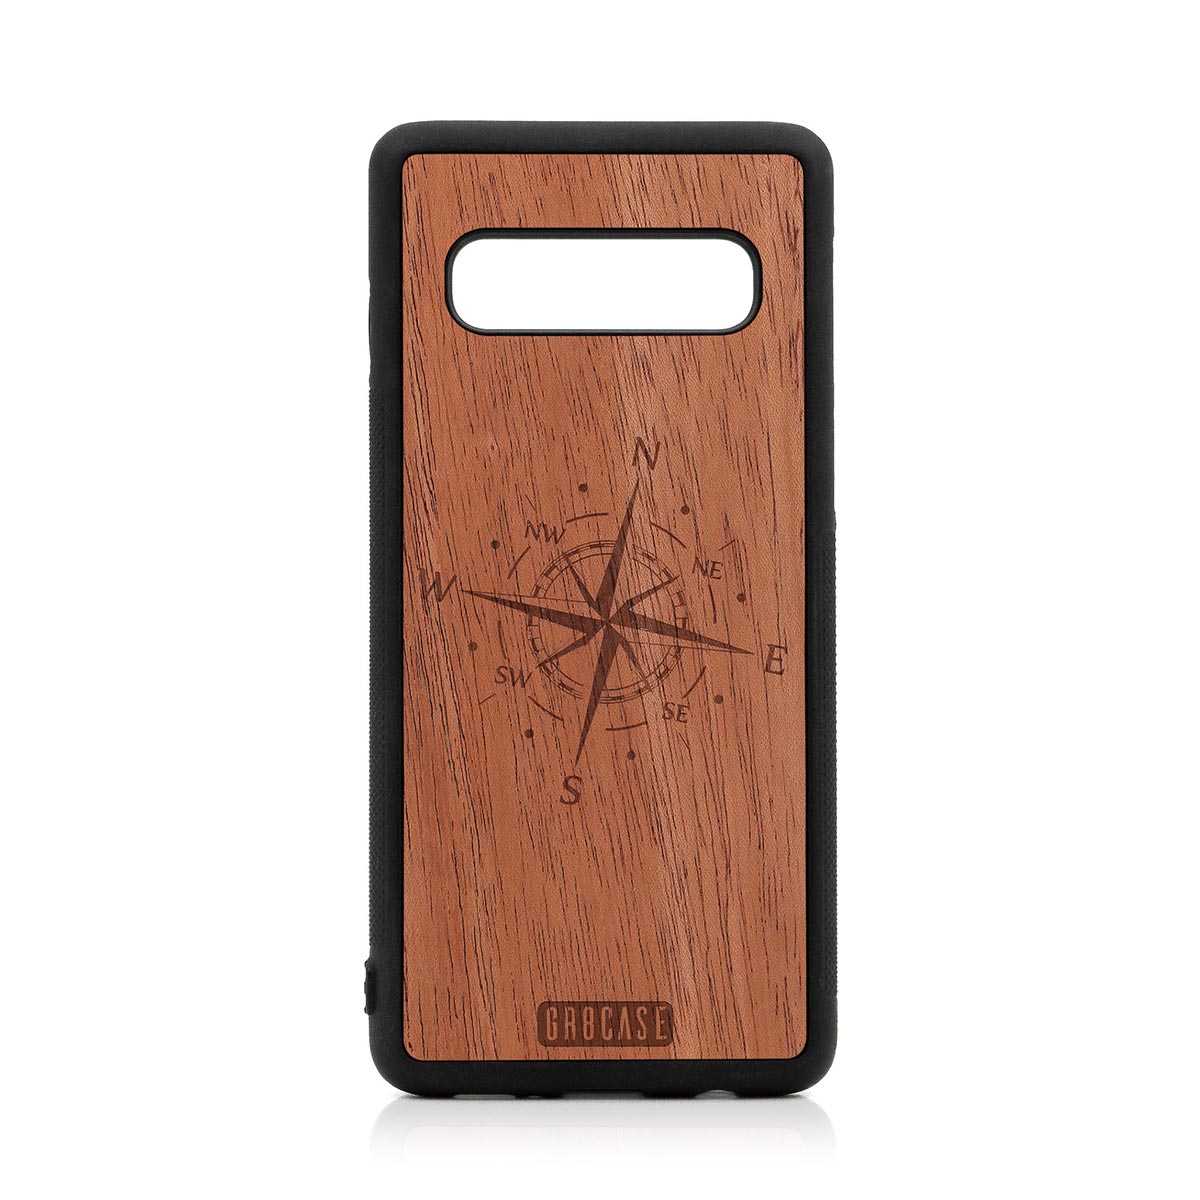 Compass Design Wood Case For Samsung Galaxy S10 by GR8CASE